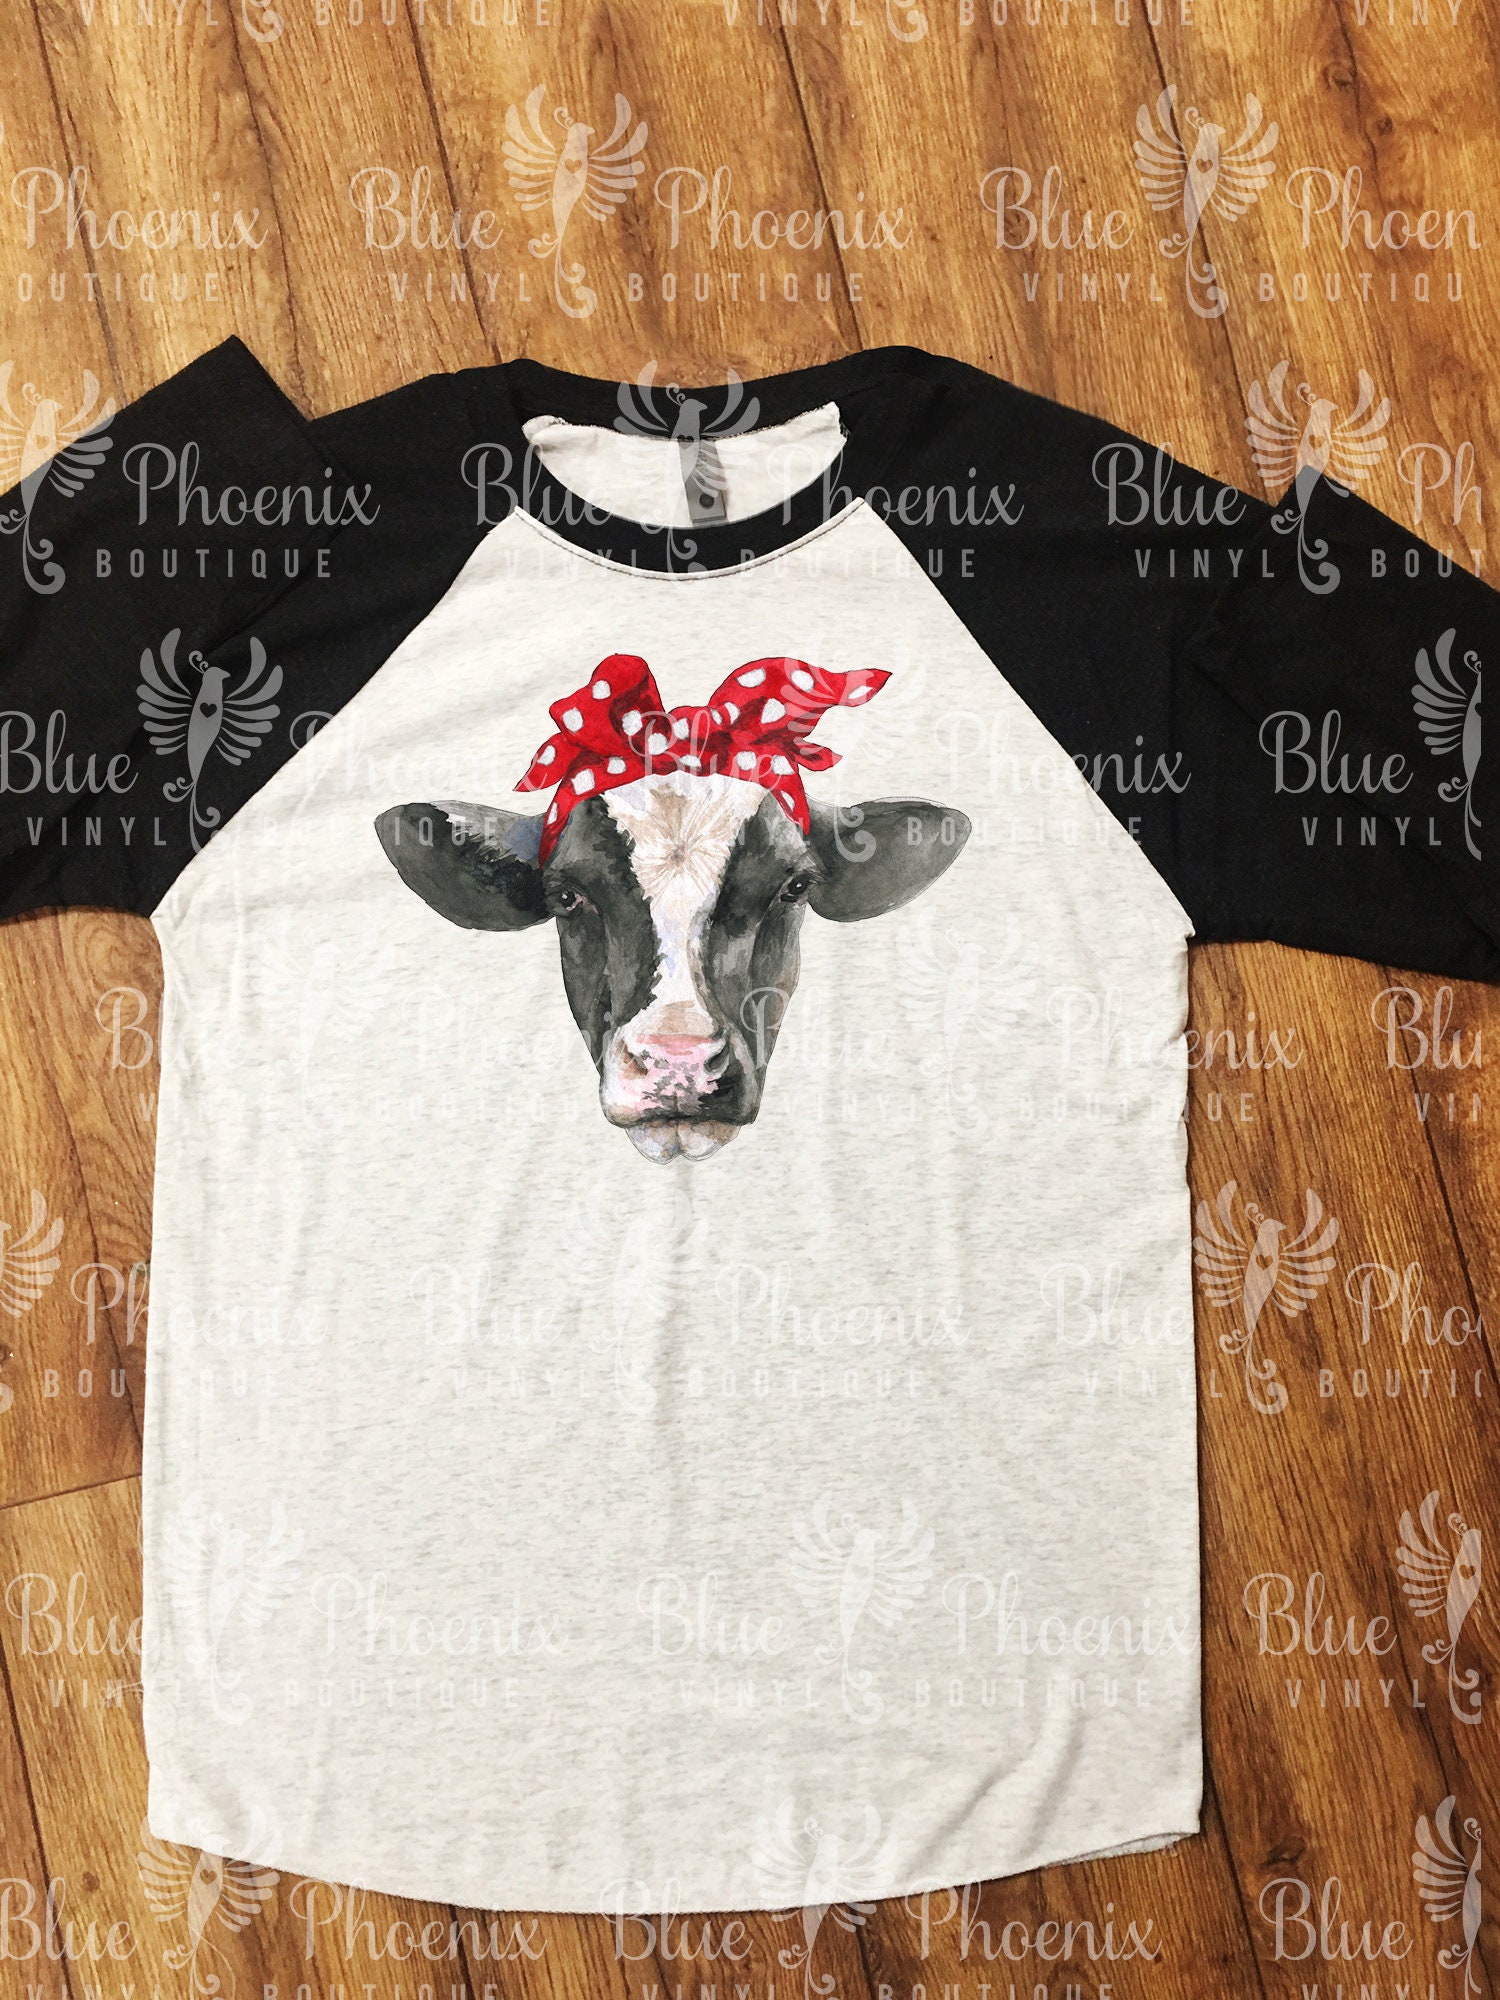 Personalised Heat Transfer Iron On T-Shirt Colorful Animal Cattle Head Design EB 